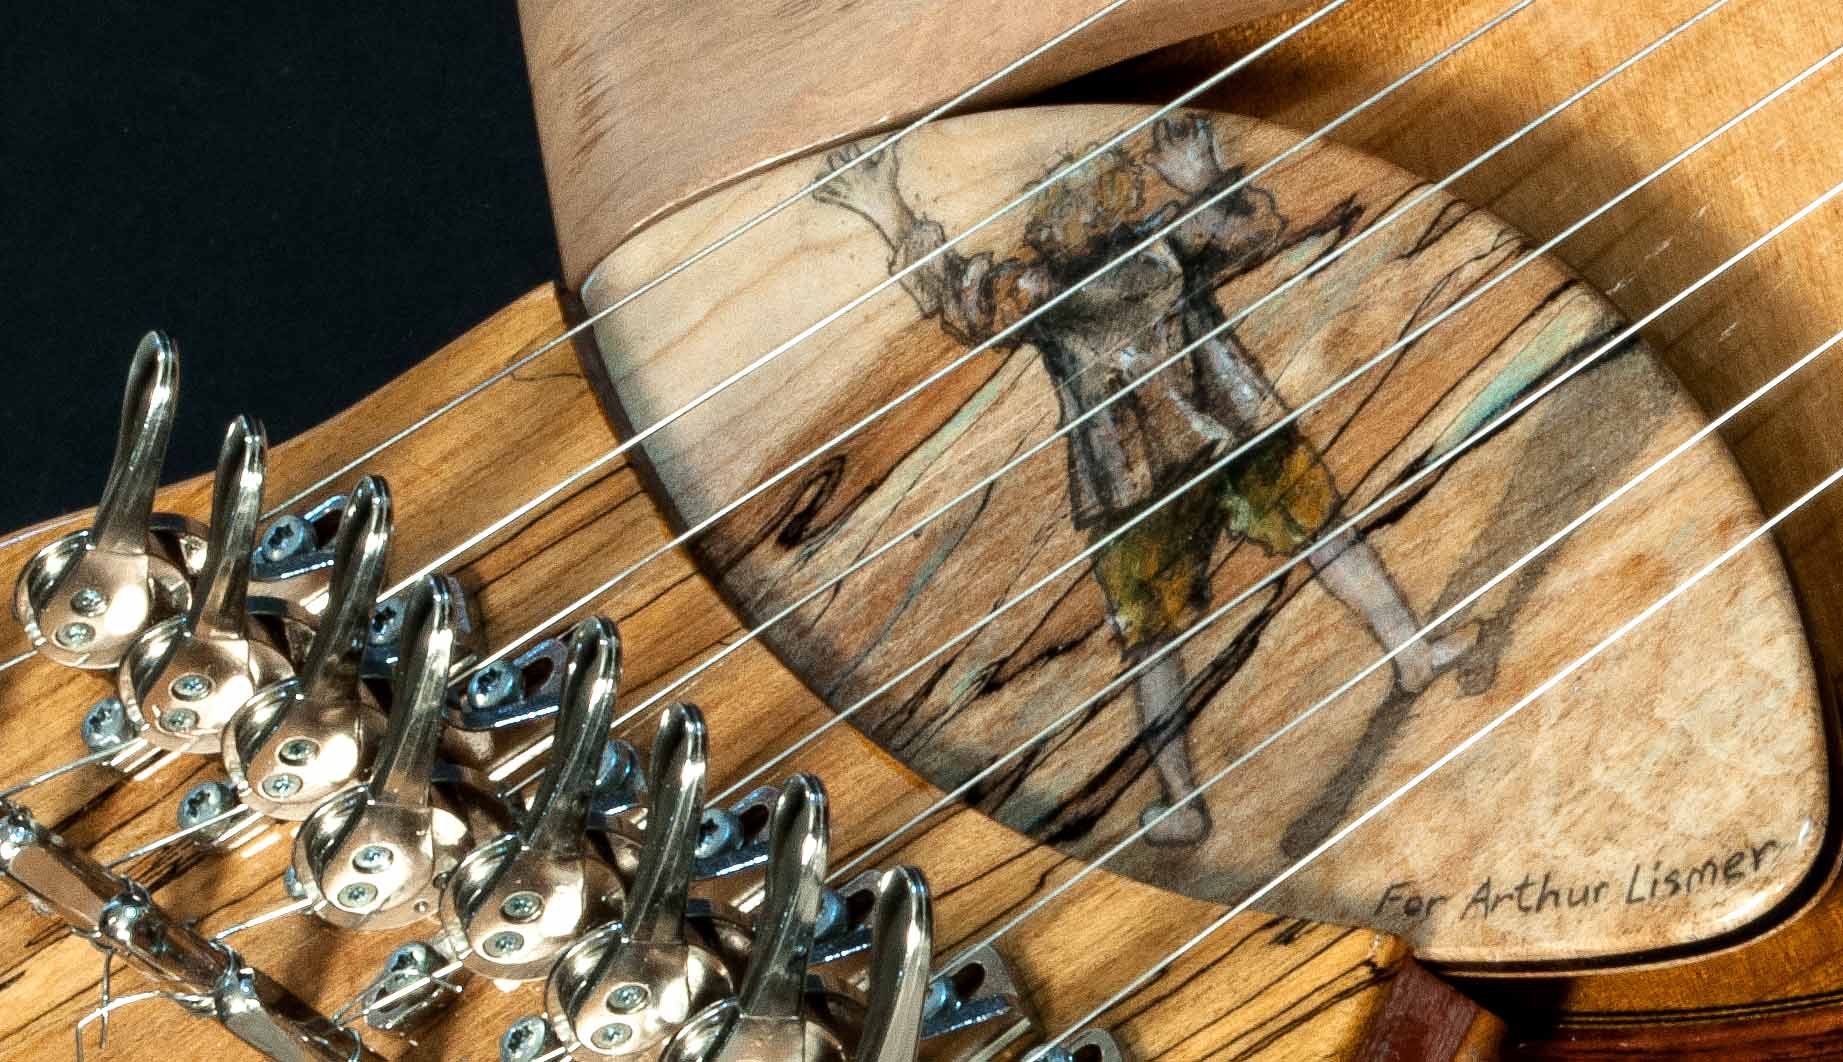 Close-up photograph of head of guitar with strings and metal tuners; detail of wooden insert showing back of man and the words "For Arthur Lismer" at the bottom.